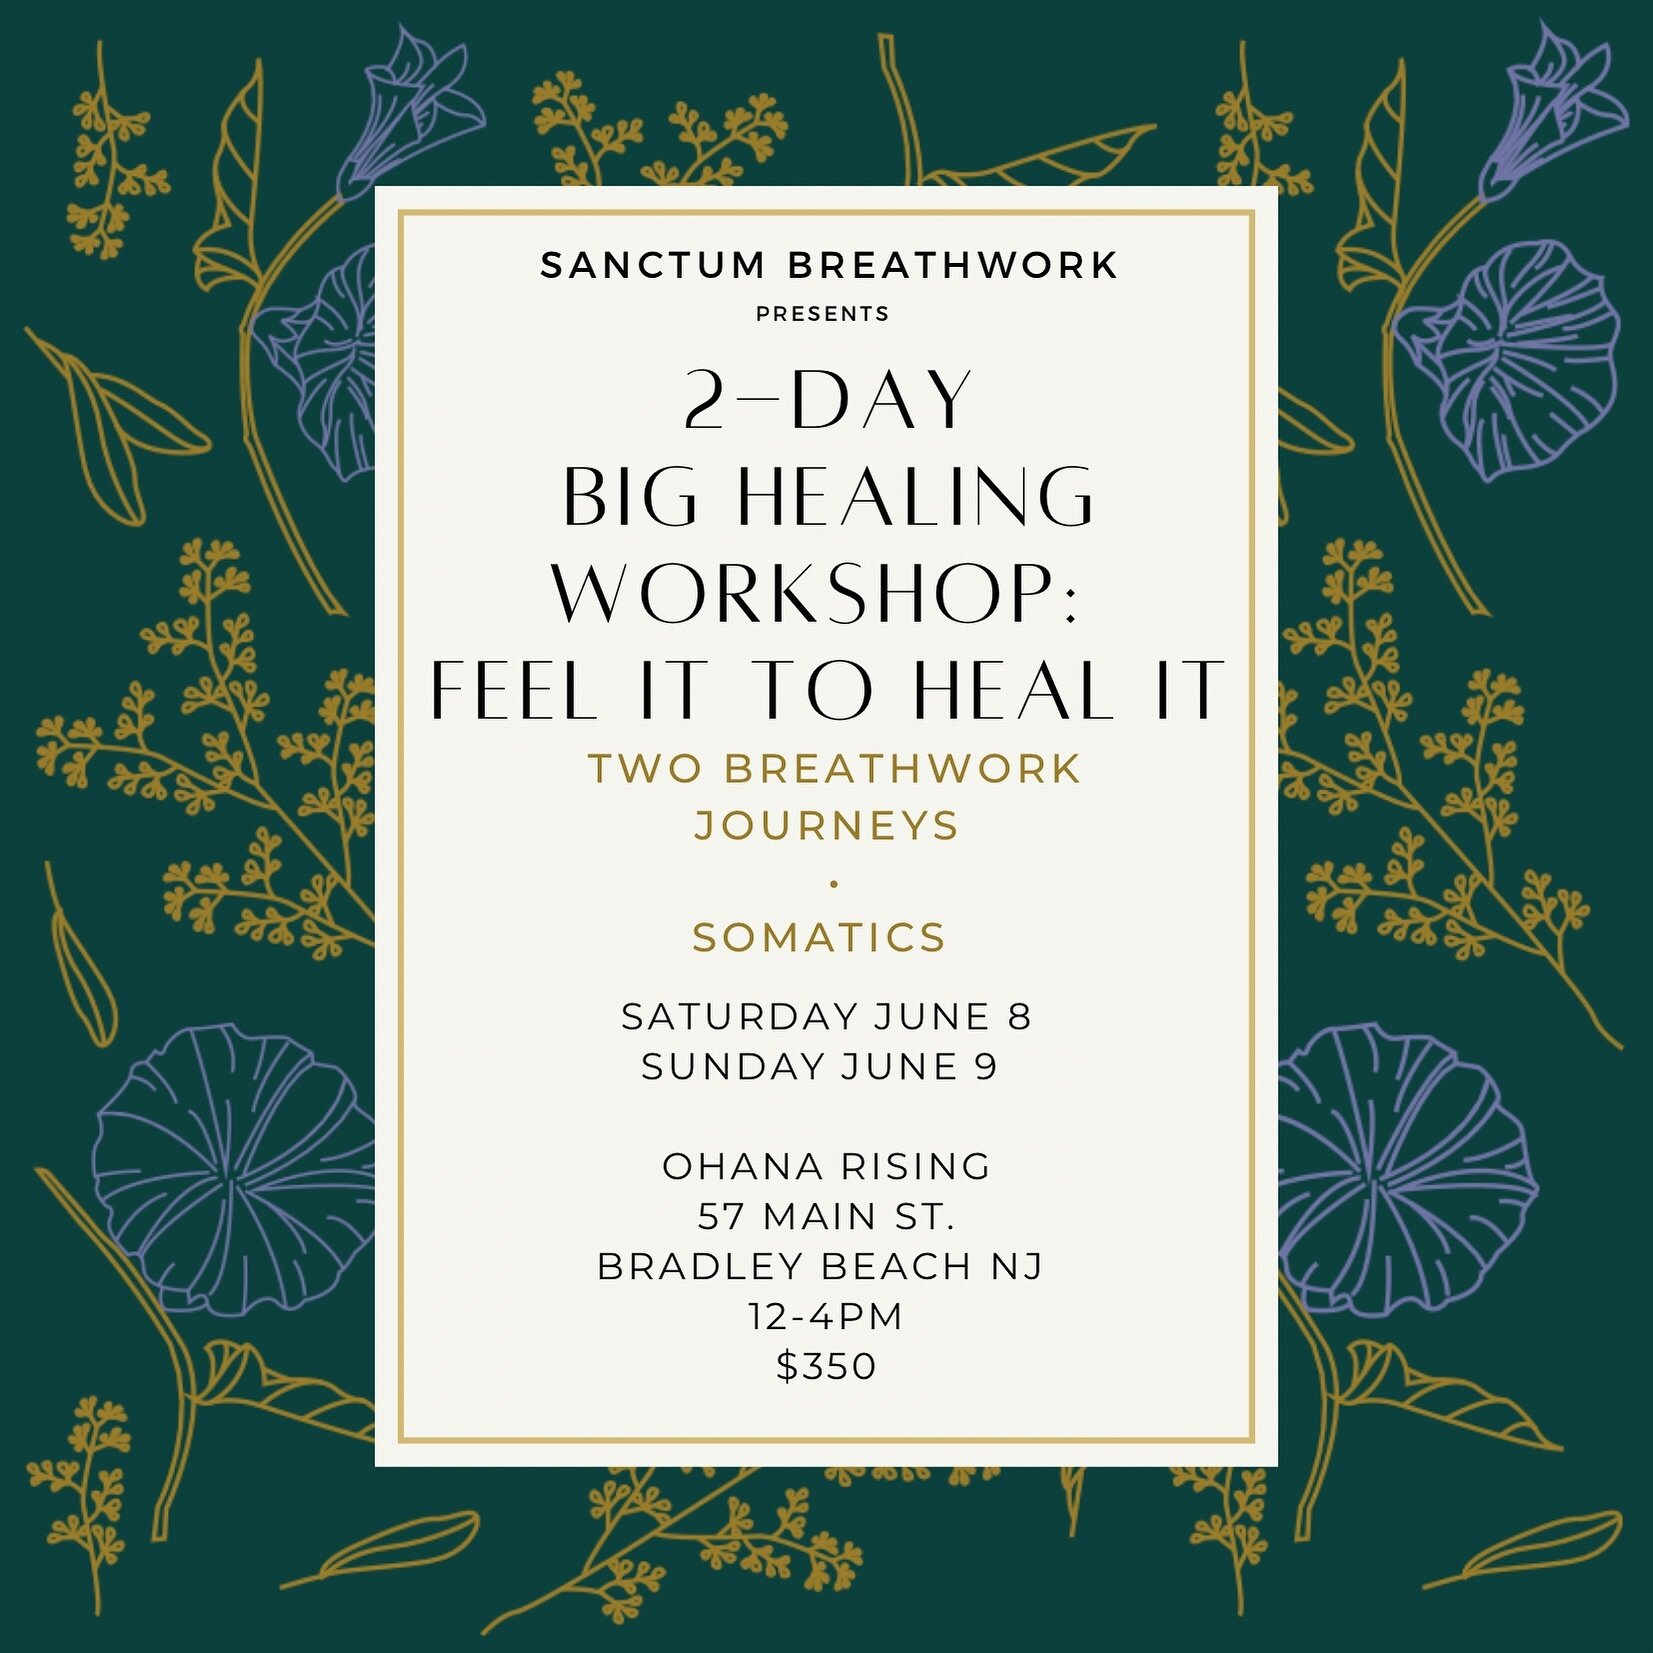 ✨Big Healing✨

Sanctum Breathwork Big Healing Wokrshop: FEEL IT TO HEAL IT! This two-day journey is meticulously crafted to guide you through profound healing processes, utilizing an array of powerful modalities such as Breathwork, journaling, channe